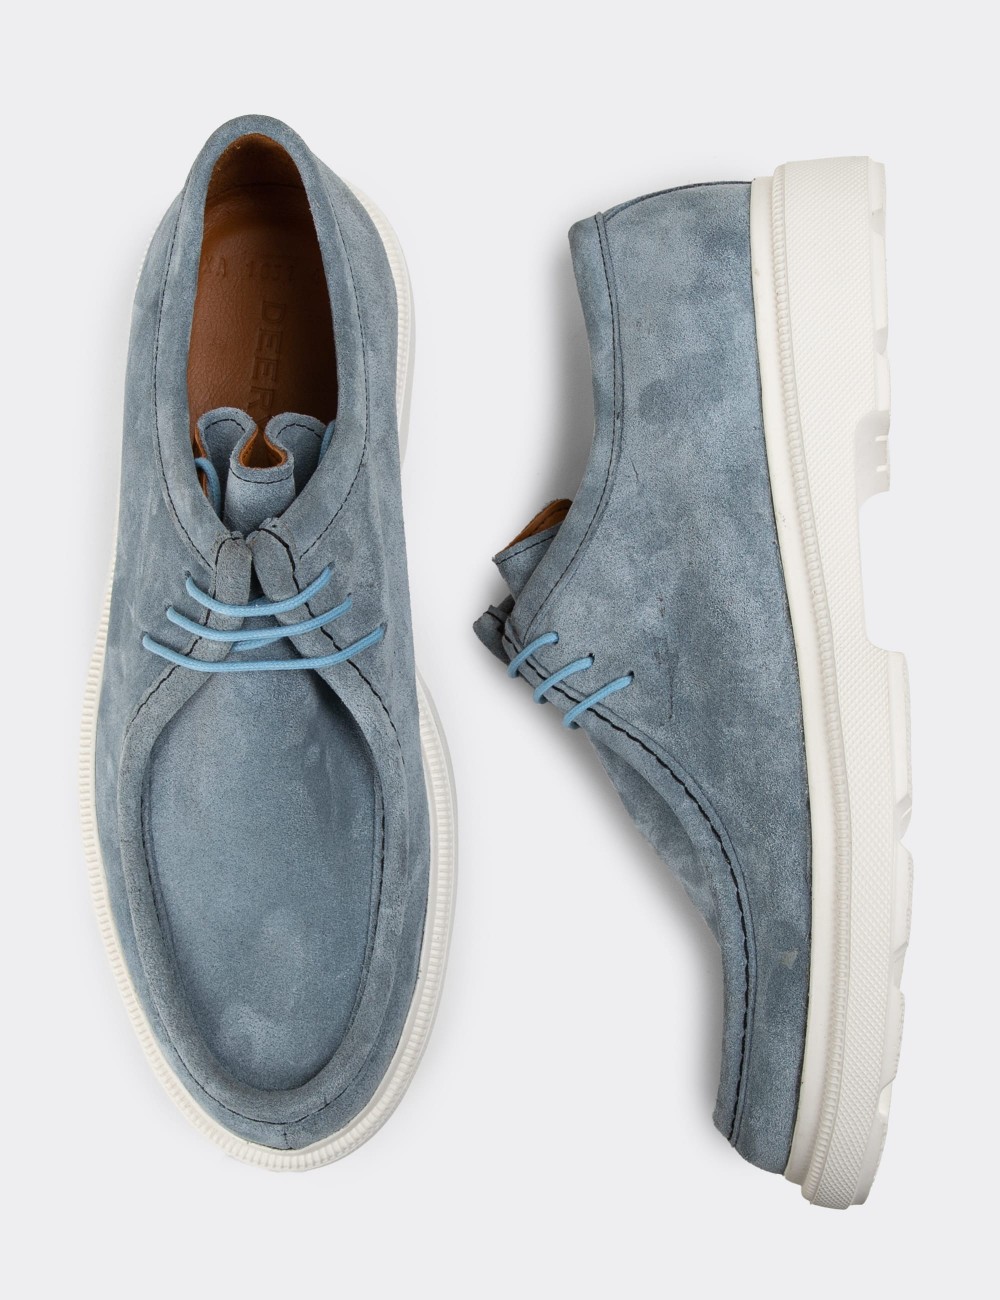 Blue Suede Leather Lace-up Shoes - 01851MMVIP03